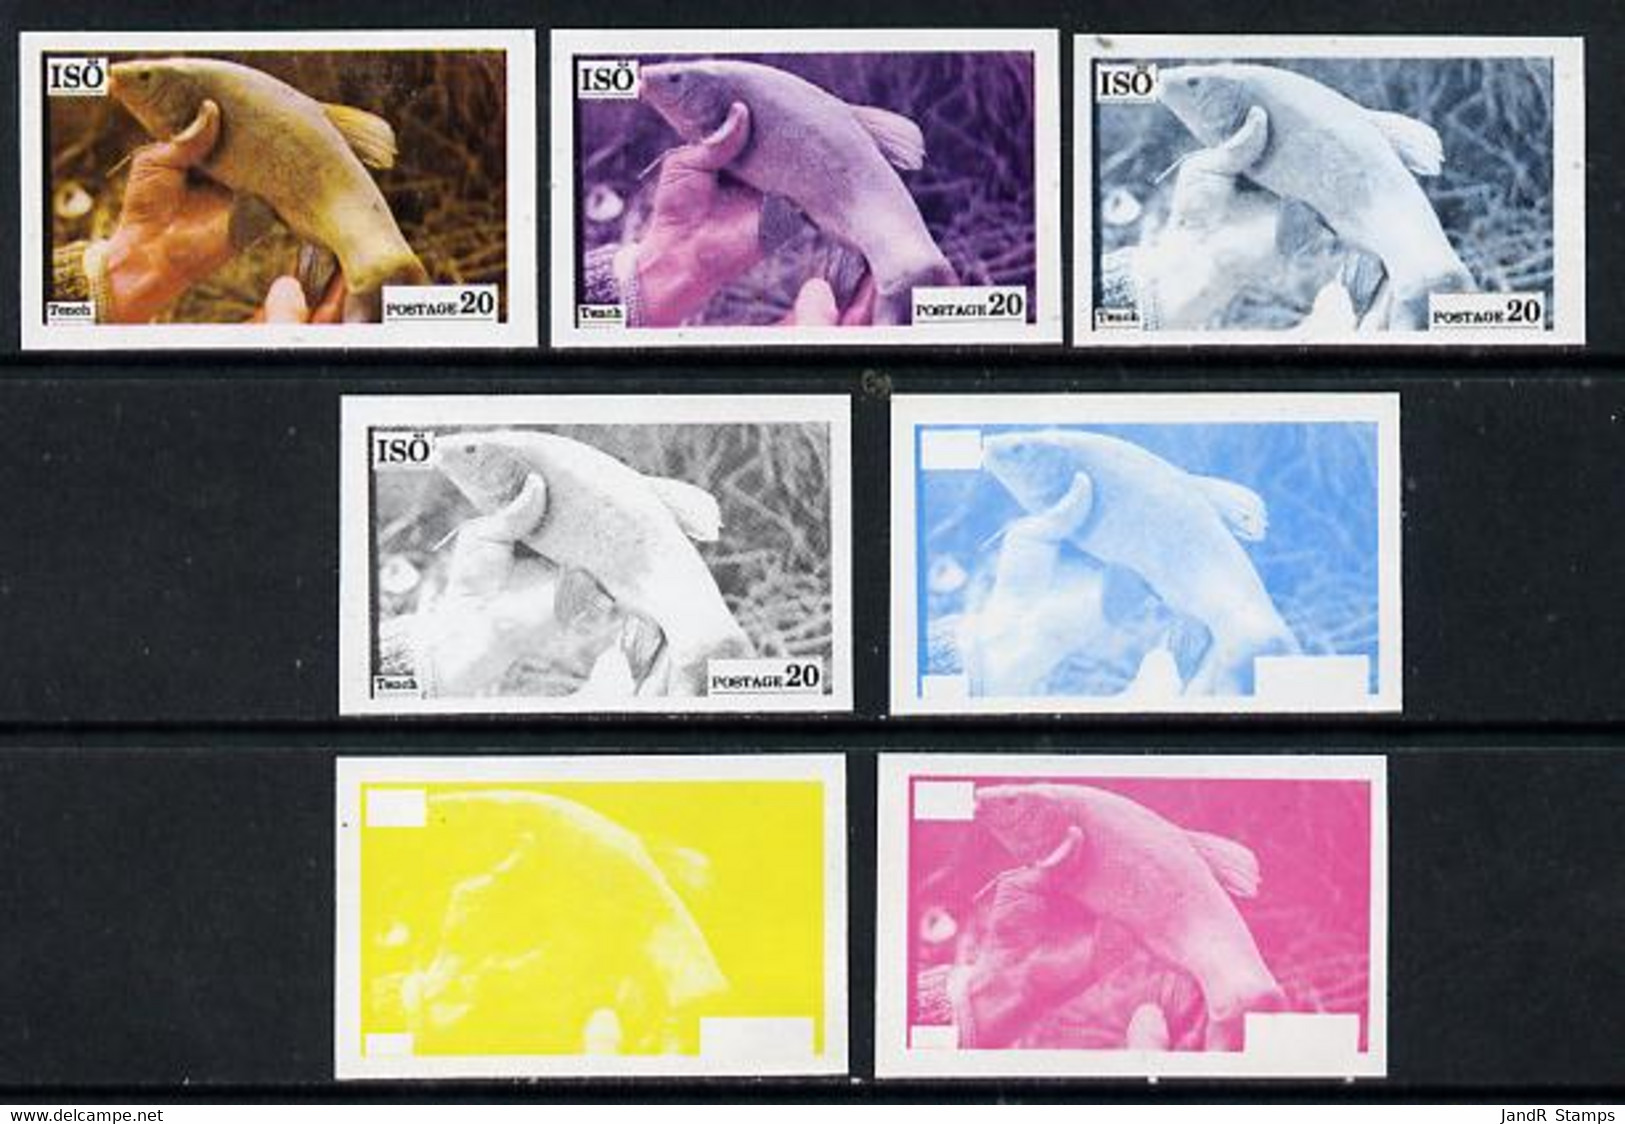 Iso - Sweden 1973 Fish 20 (Tench) Set Of 7 Imperf Progressive Colour Proofs Comprising The 4 Individual Colours Plus 2, - Emissions Locales